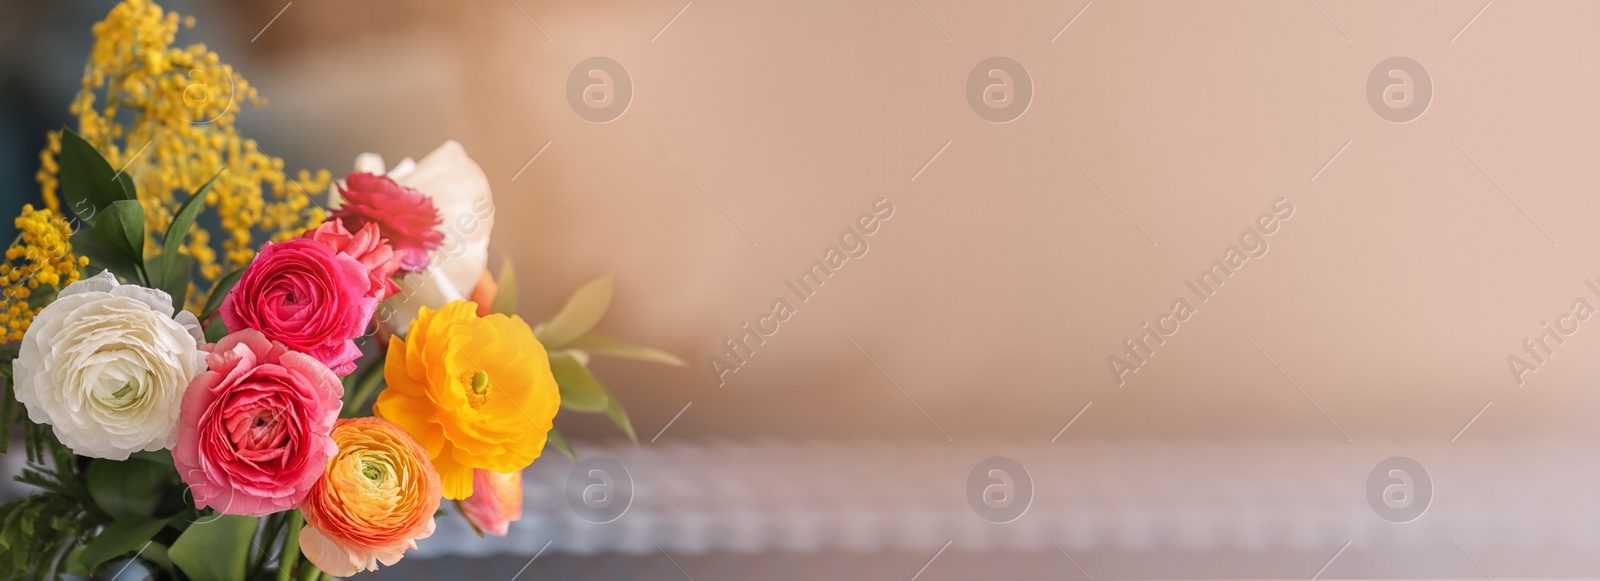 Image of Beautiful ranunculus flowers on blurred background, space for text. Banner design